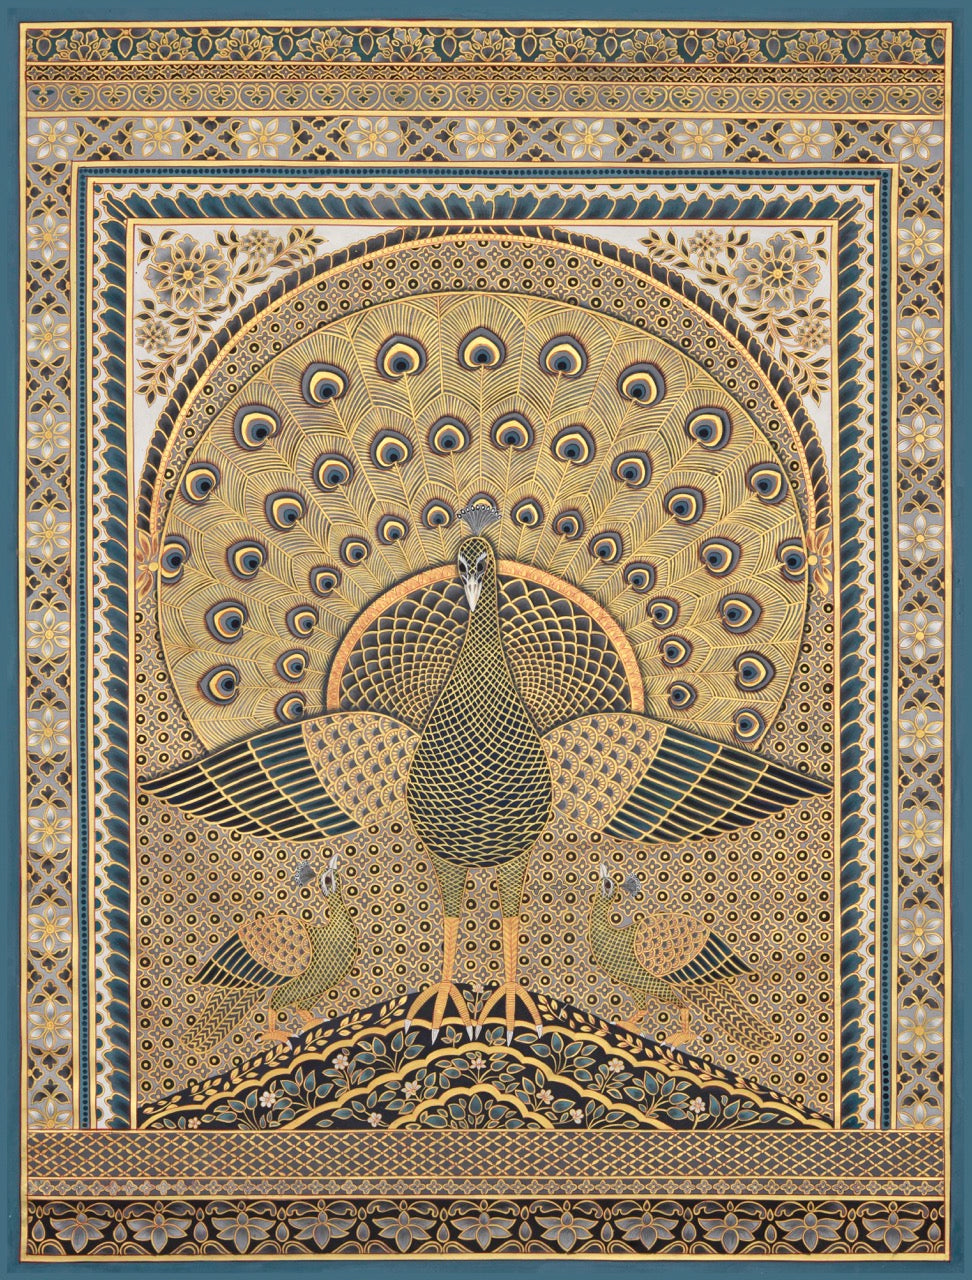 Pichwai Painting | Peacock Pichwai in Art Deco Style | Indian Art